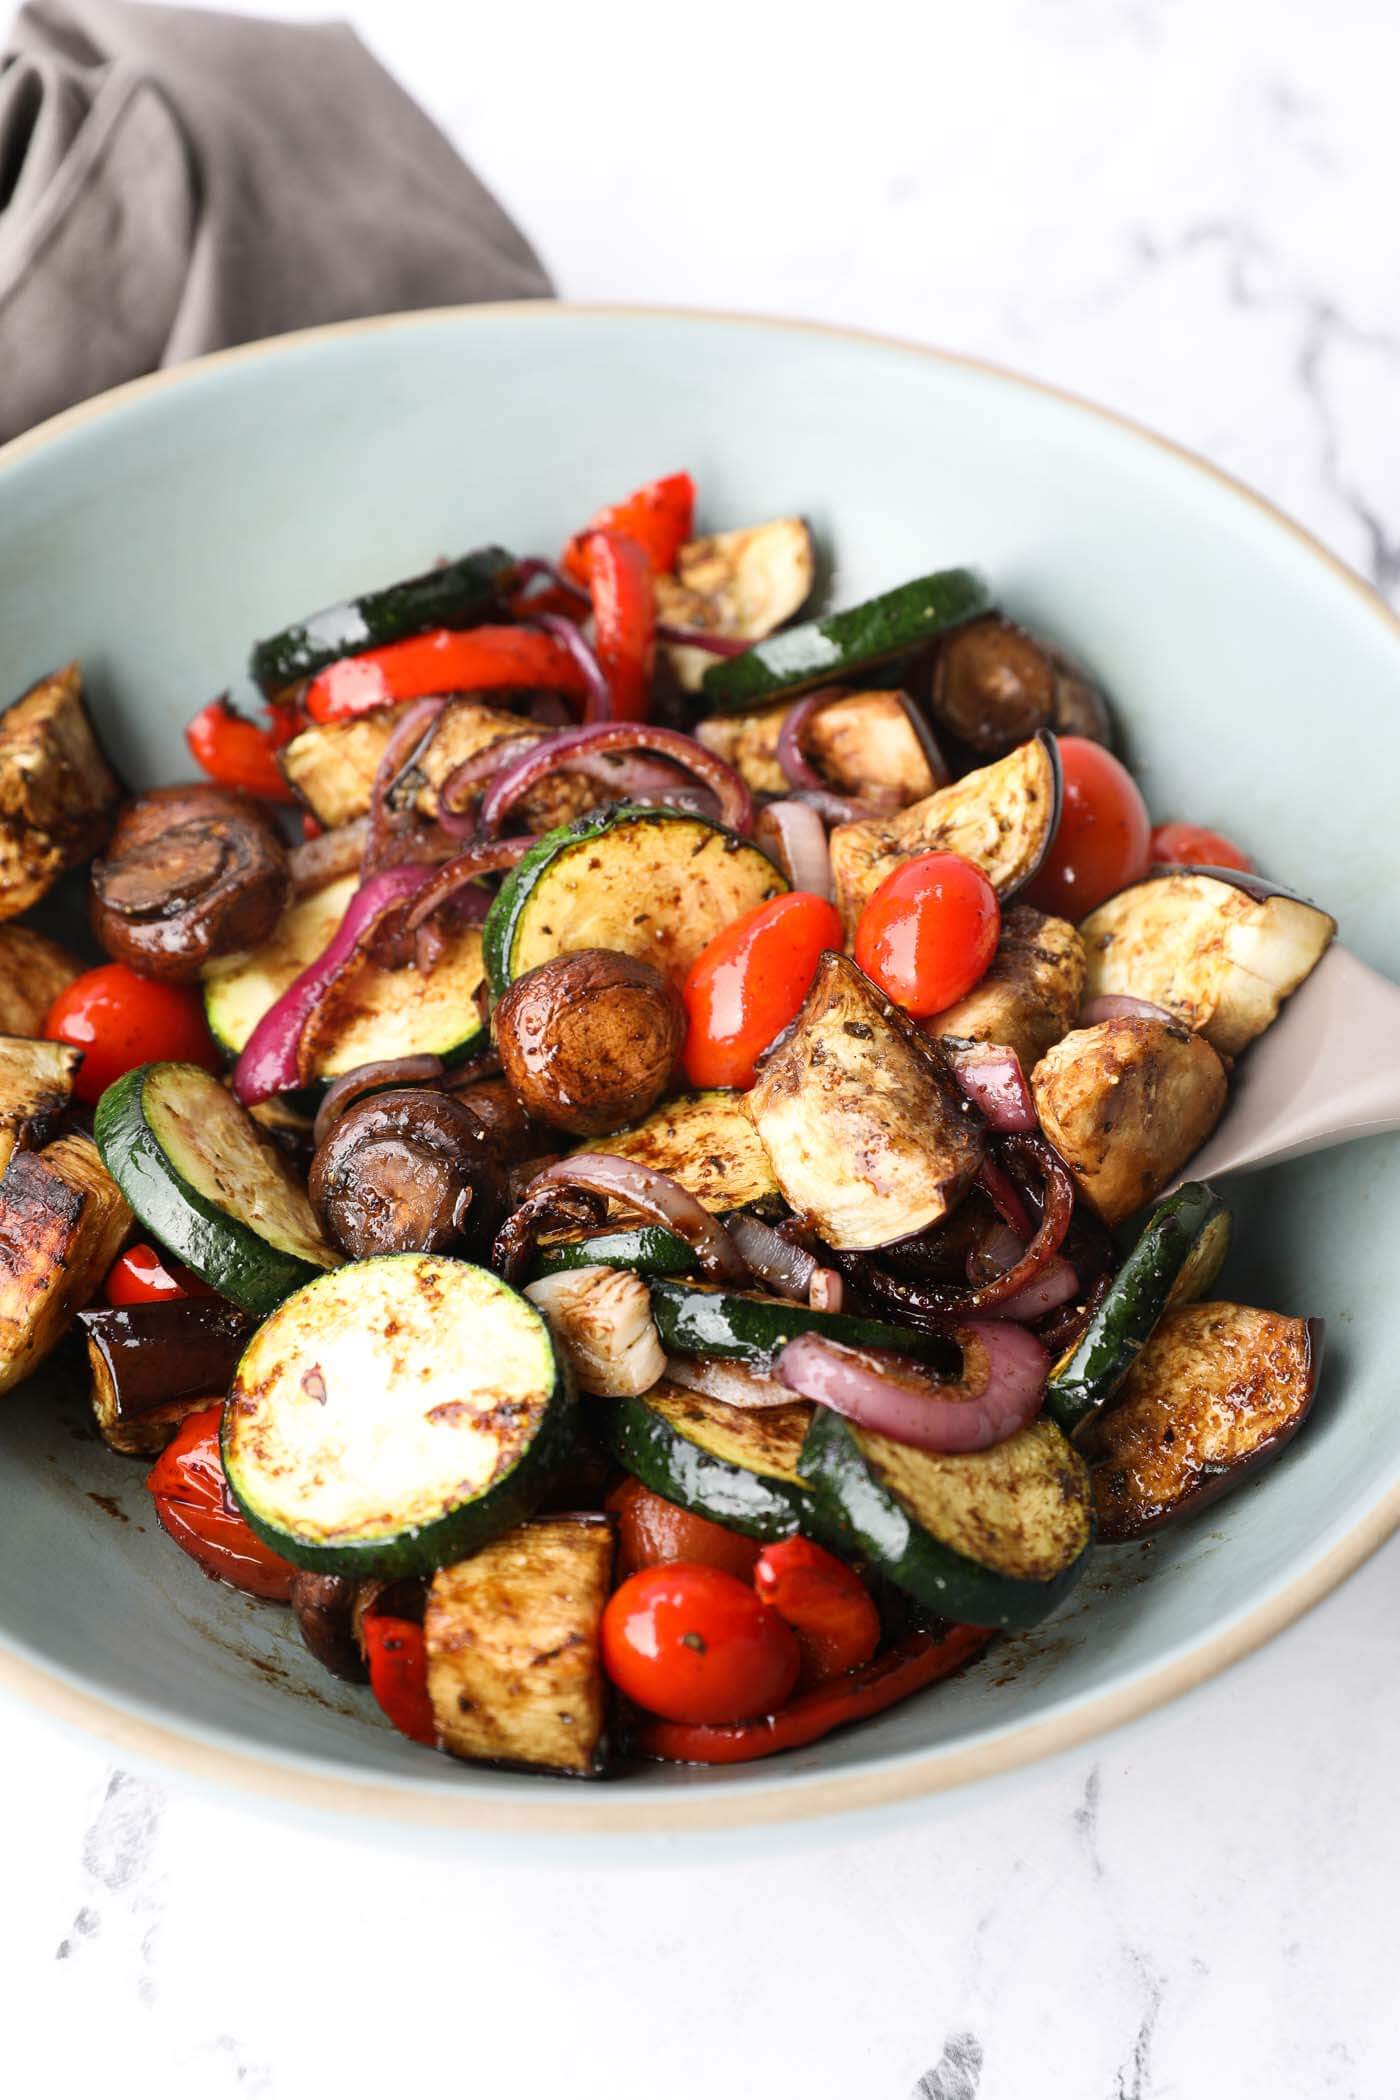 Healthy Grill Recipes: How to Grill Vegetables